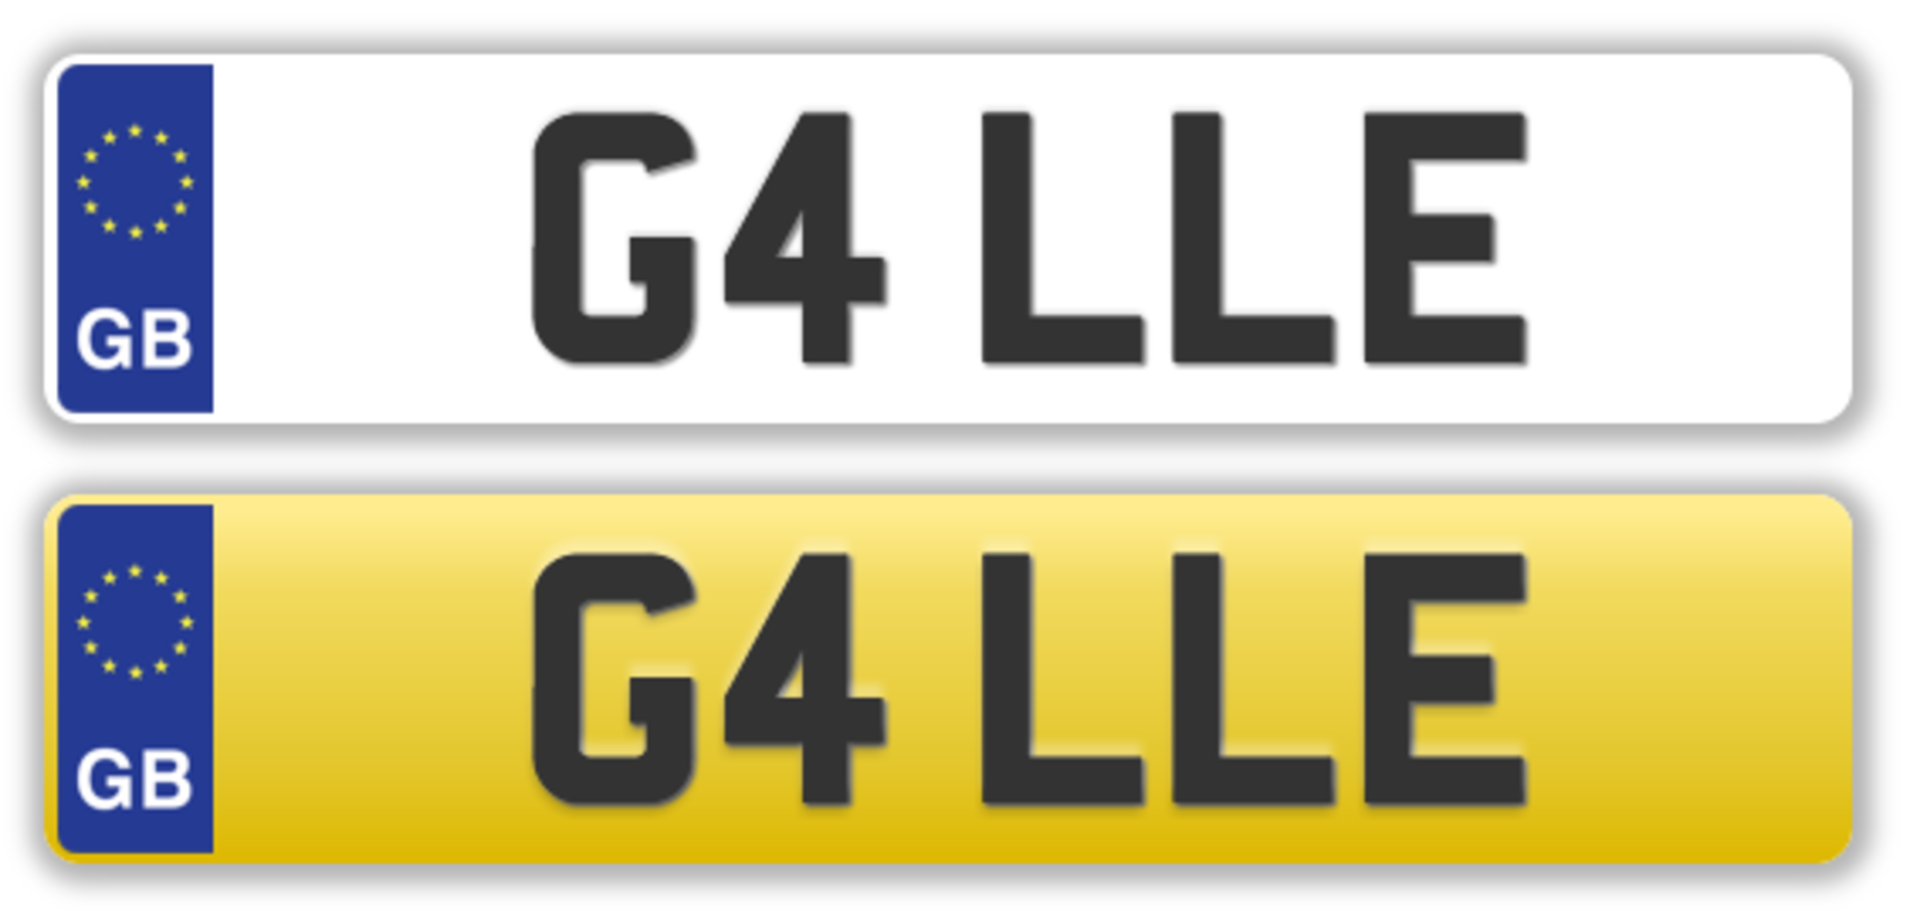 Cherished Plate - G4 LLE - No transfer fees. All registrations on retention and ready to transfer.